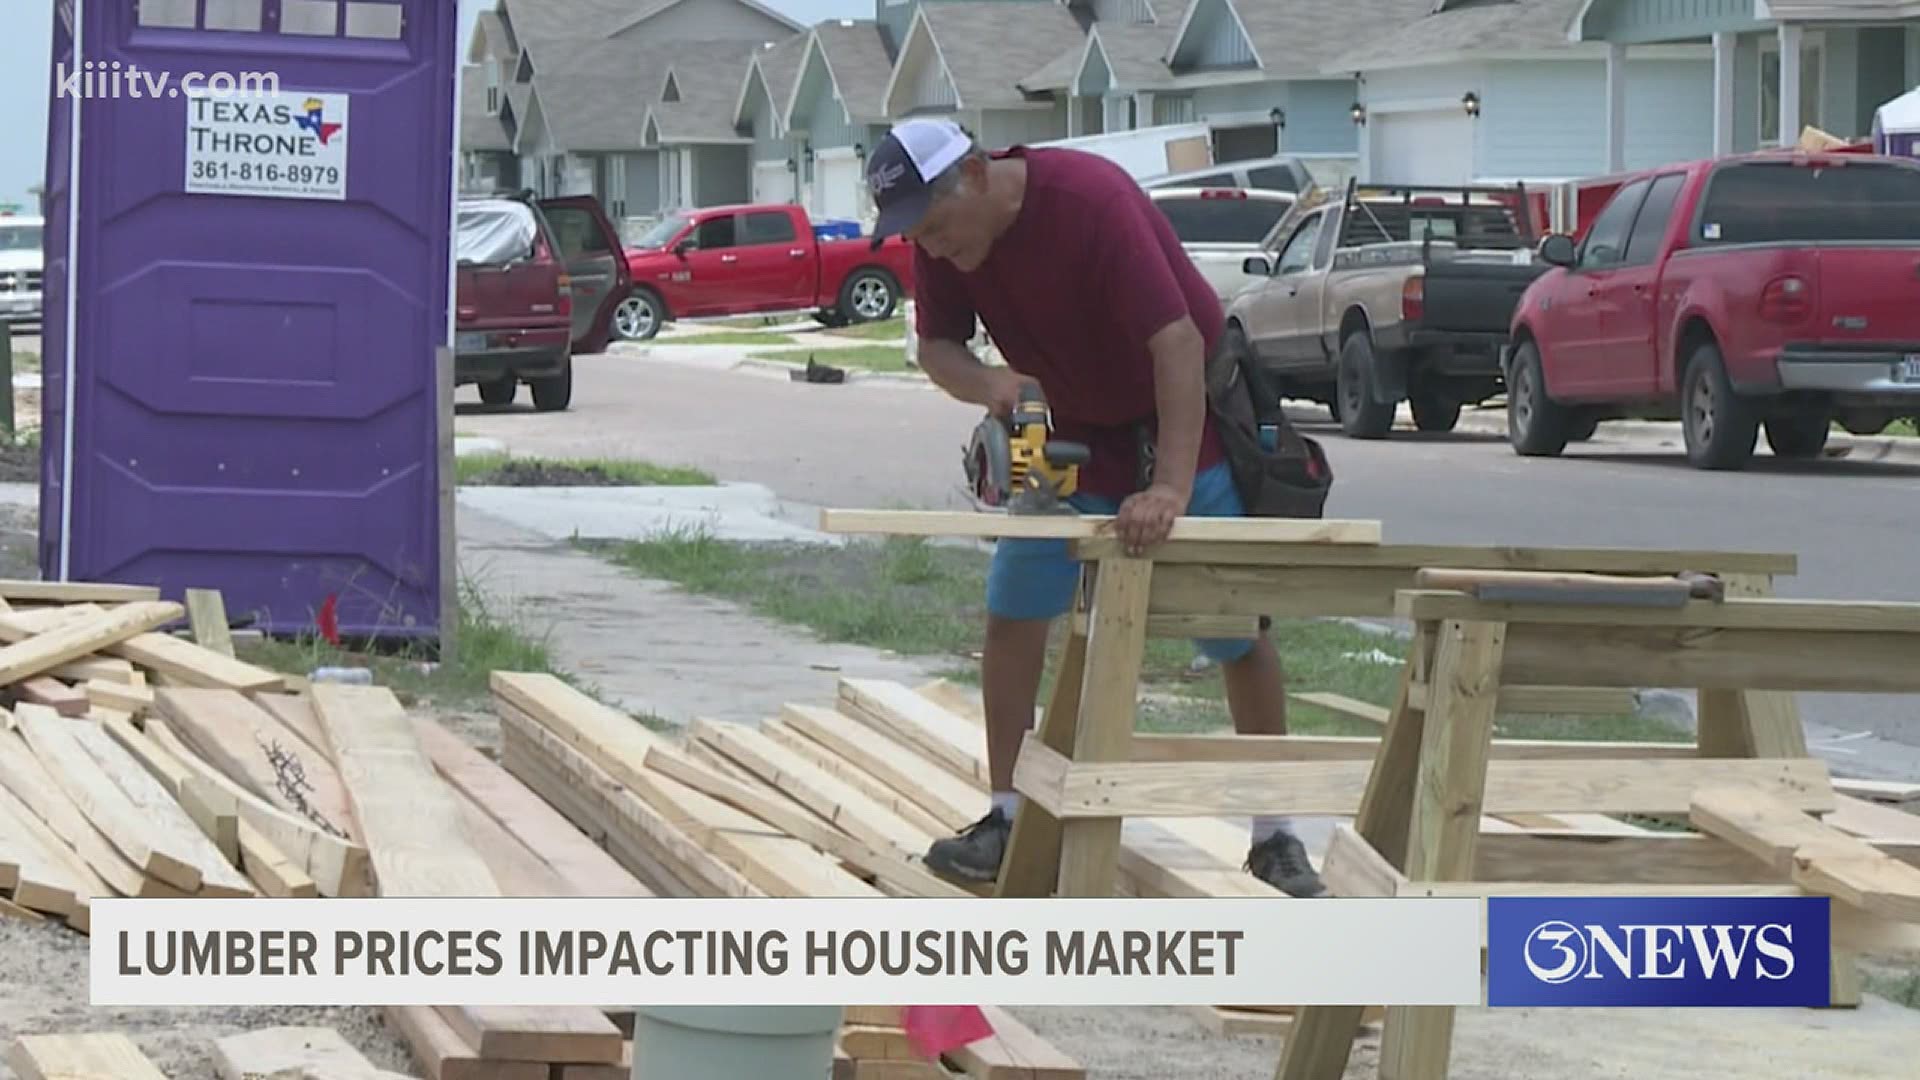 Because of the lumber shortage some folks have put building their dream home and other projects on hold. The shortage has also impacted the housing market.